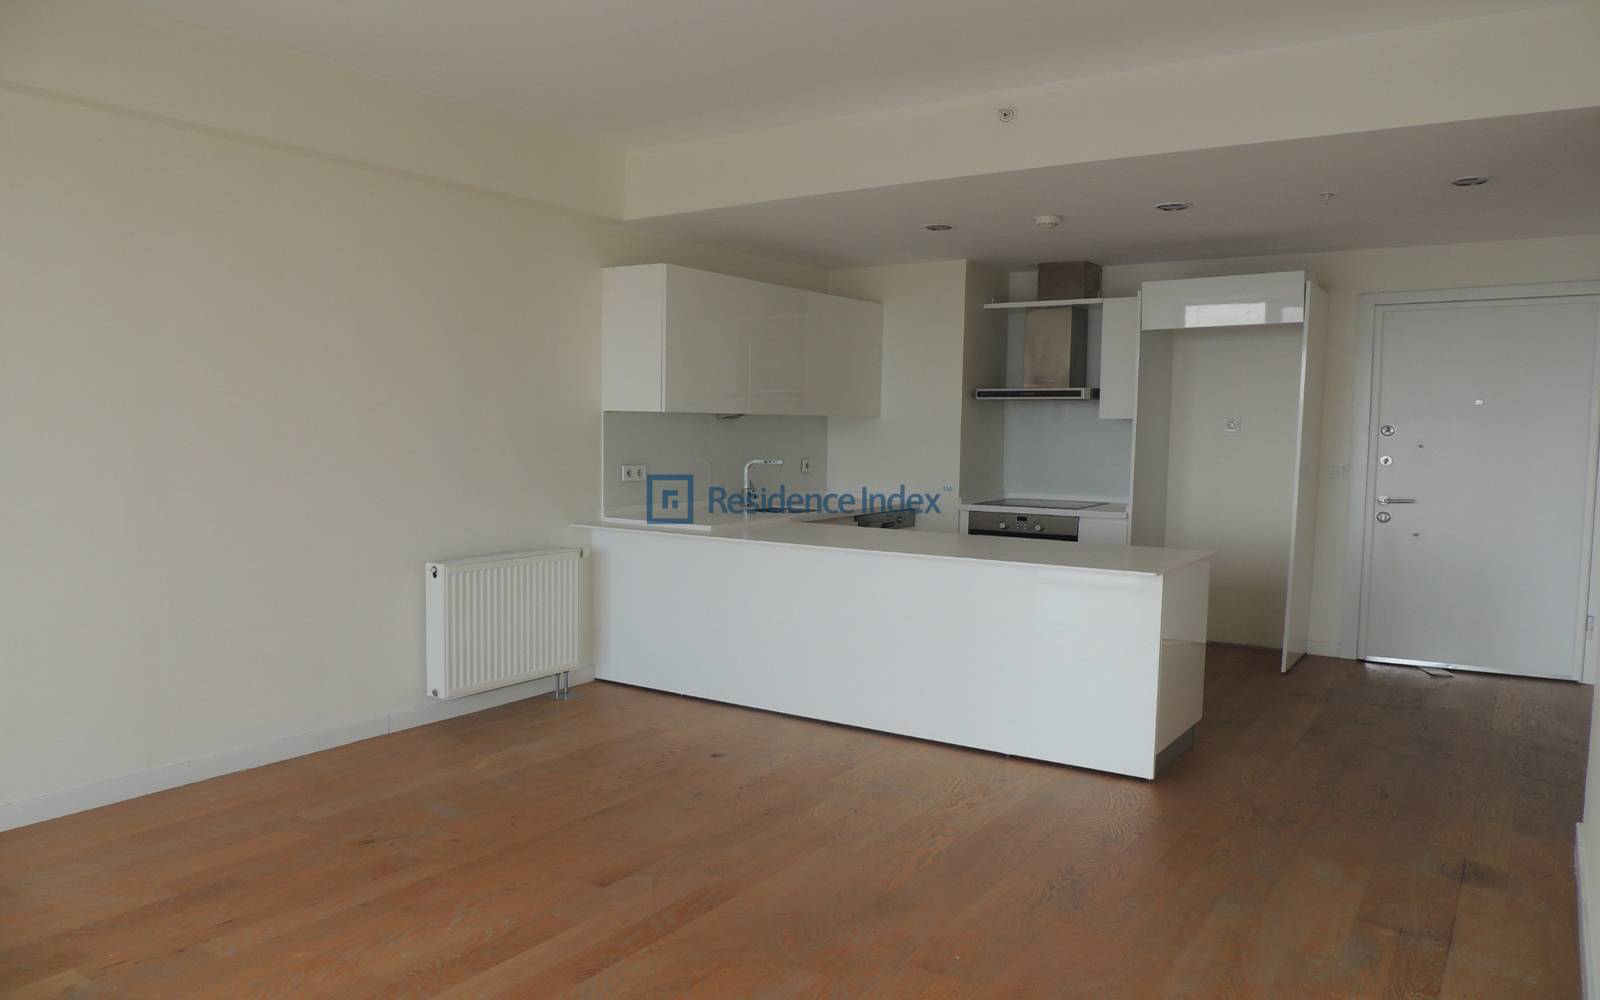 İstwest - Flat For Rent In İstwest 1+1